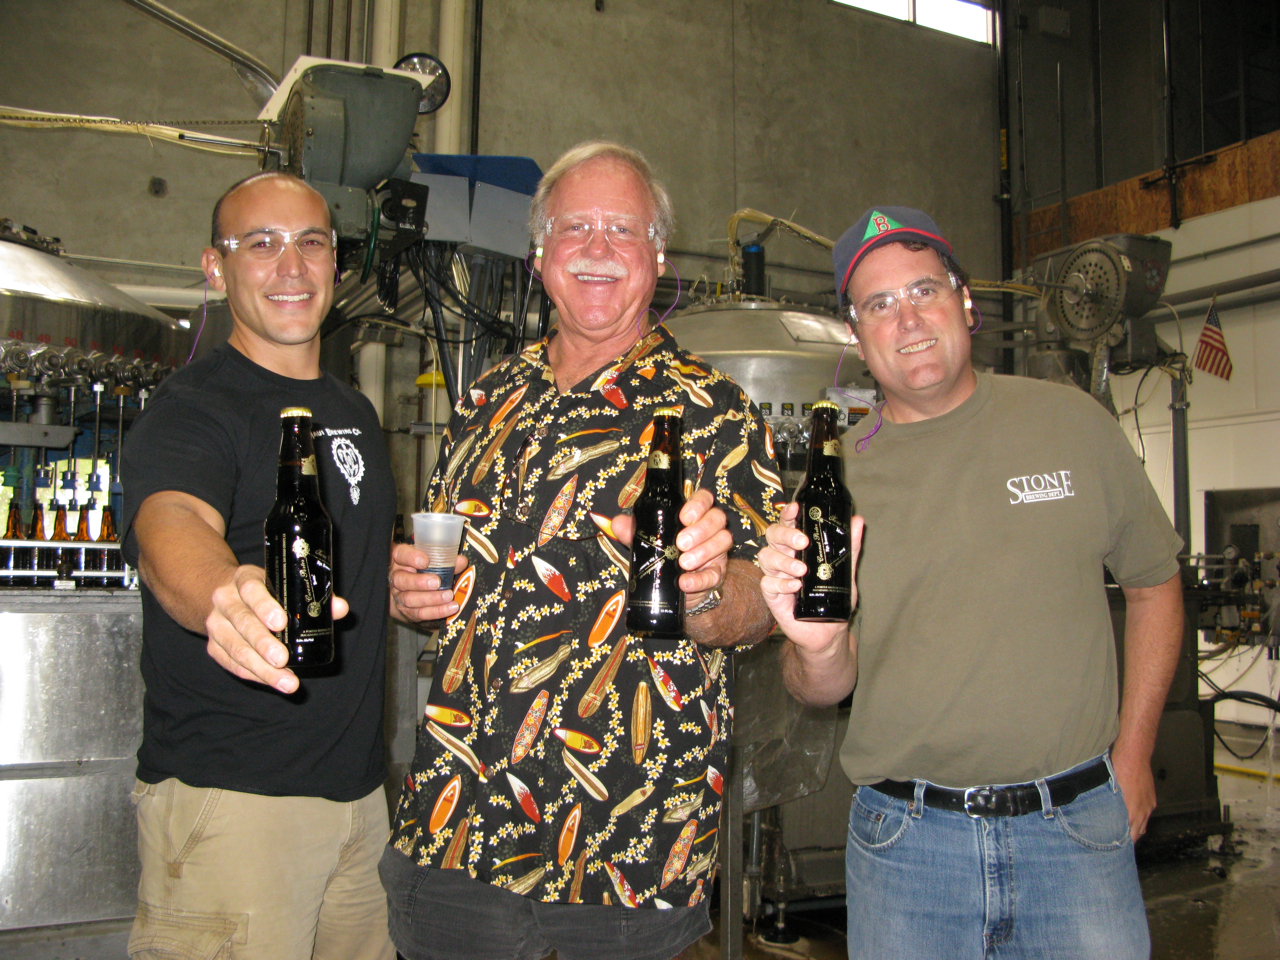 The masterminds behnd the beer (from left to right): Garrett Marrero from Maui Brewing Co., Homebrewer Ken Schmidt, and Stone Head Brewer Mitch Steele